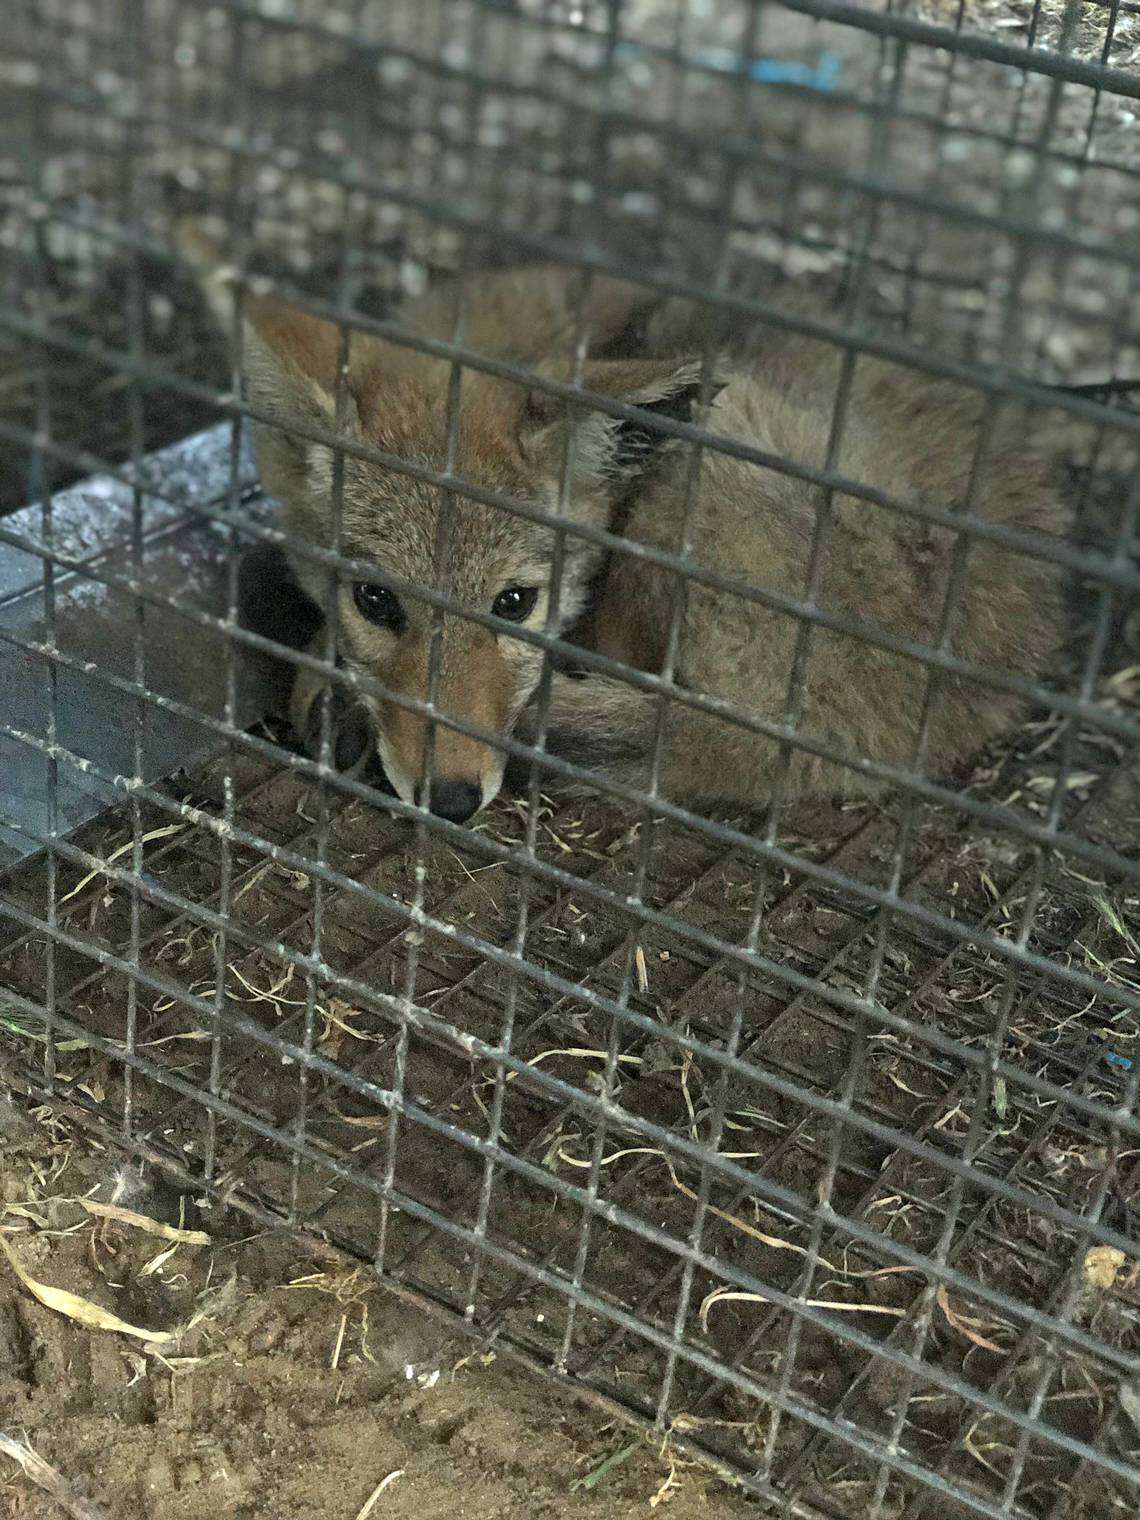 Coyote inside metal cage